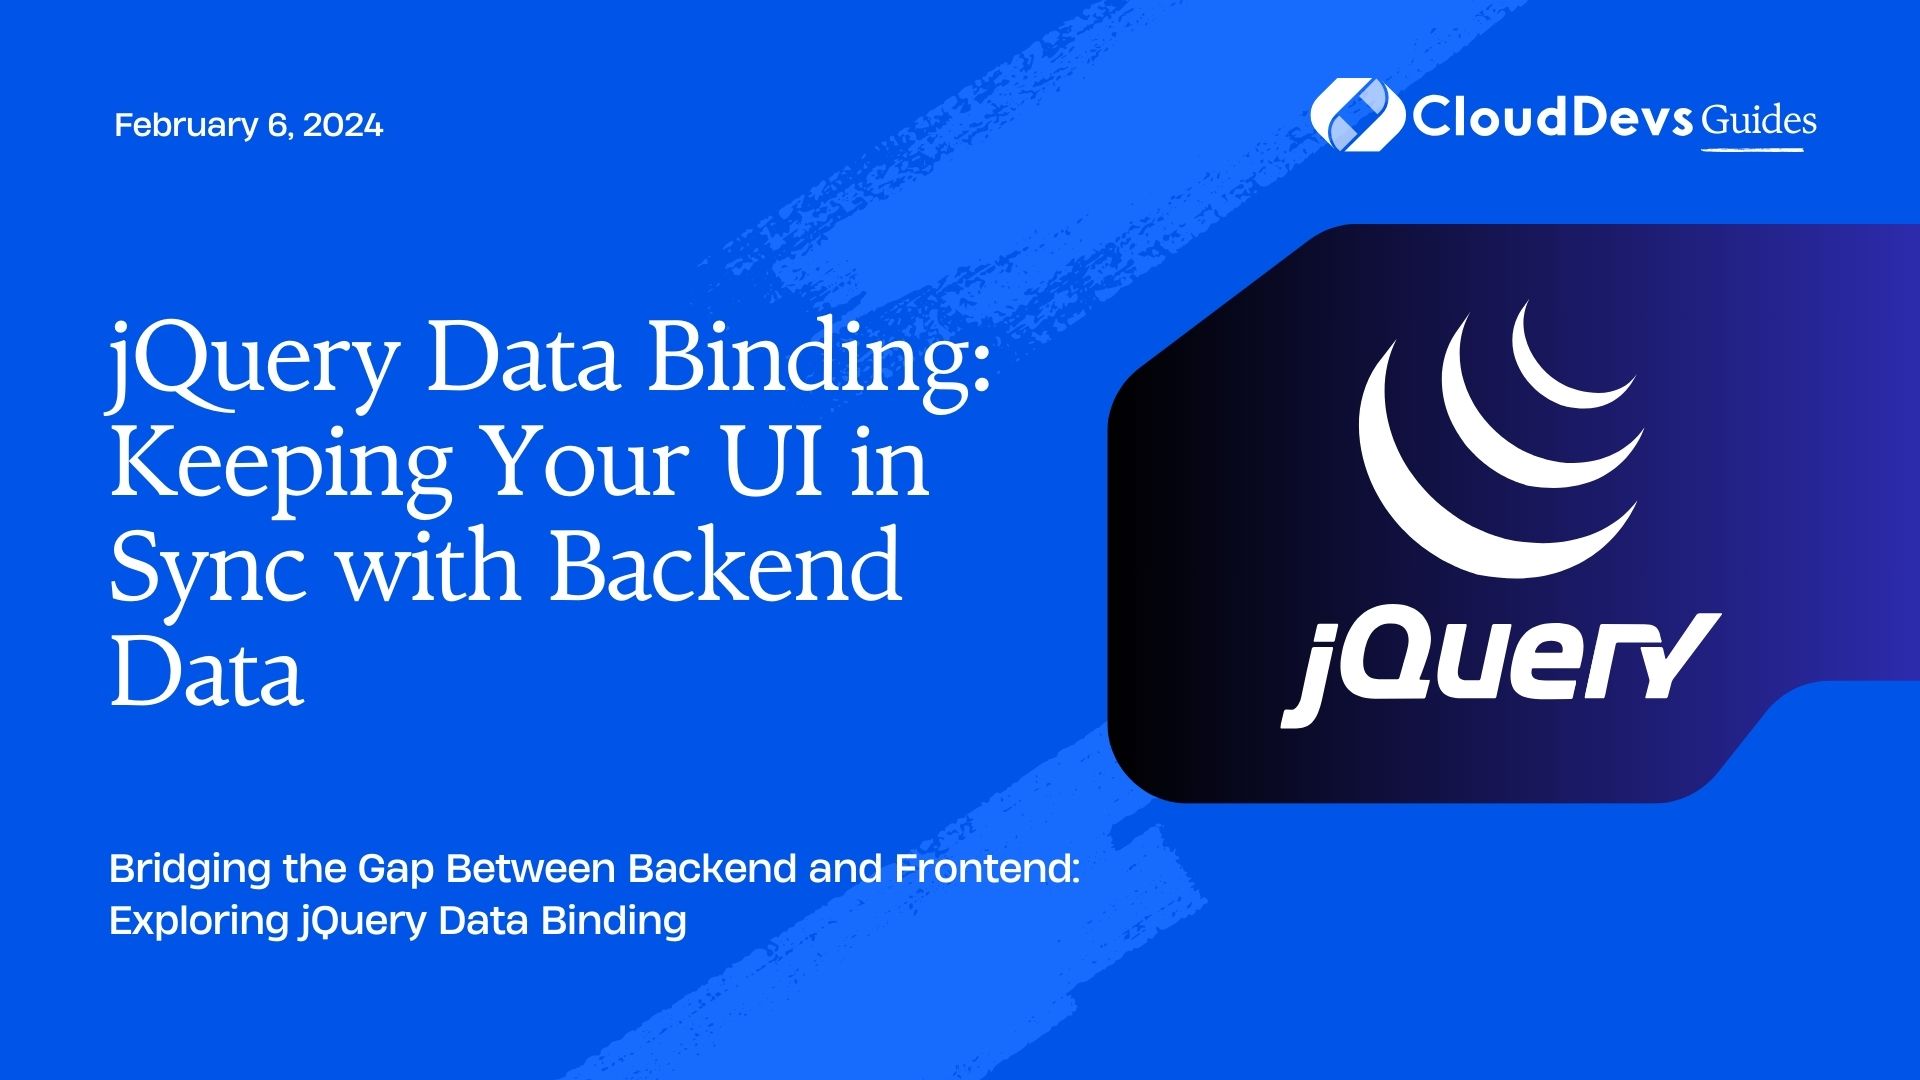 jQuery Data Binding: Keeping Your UI in Sync with Backend Data